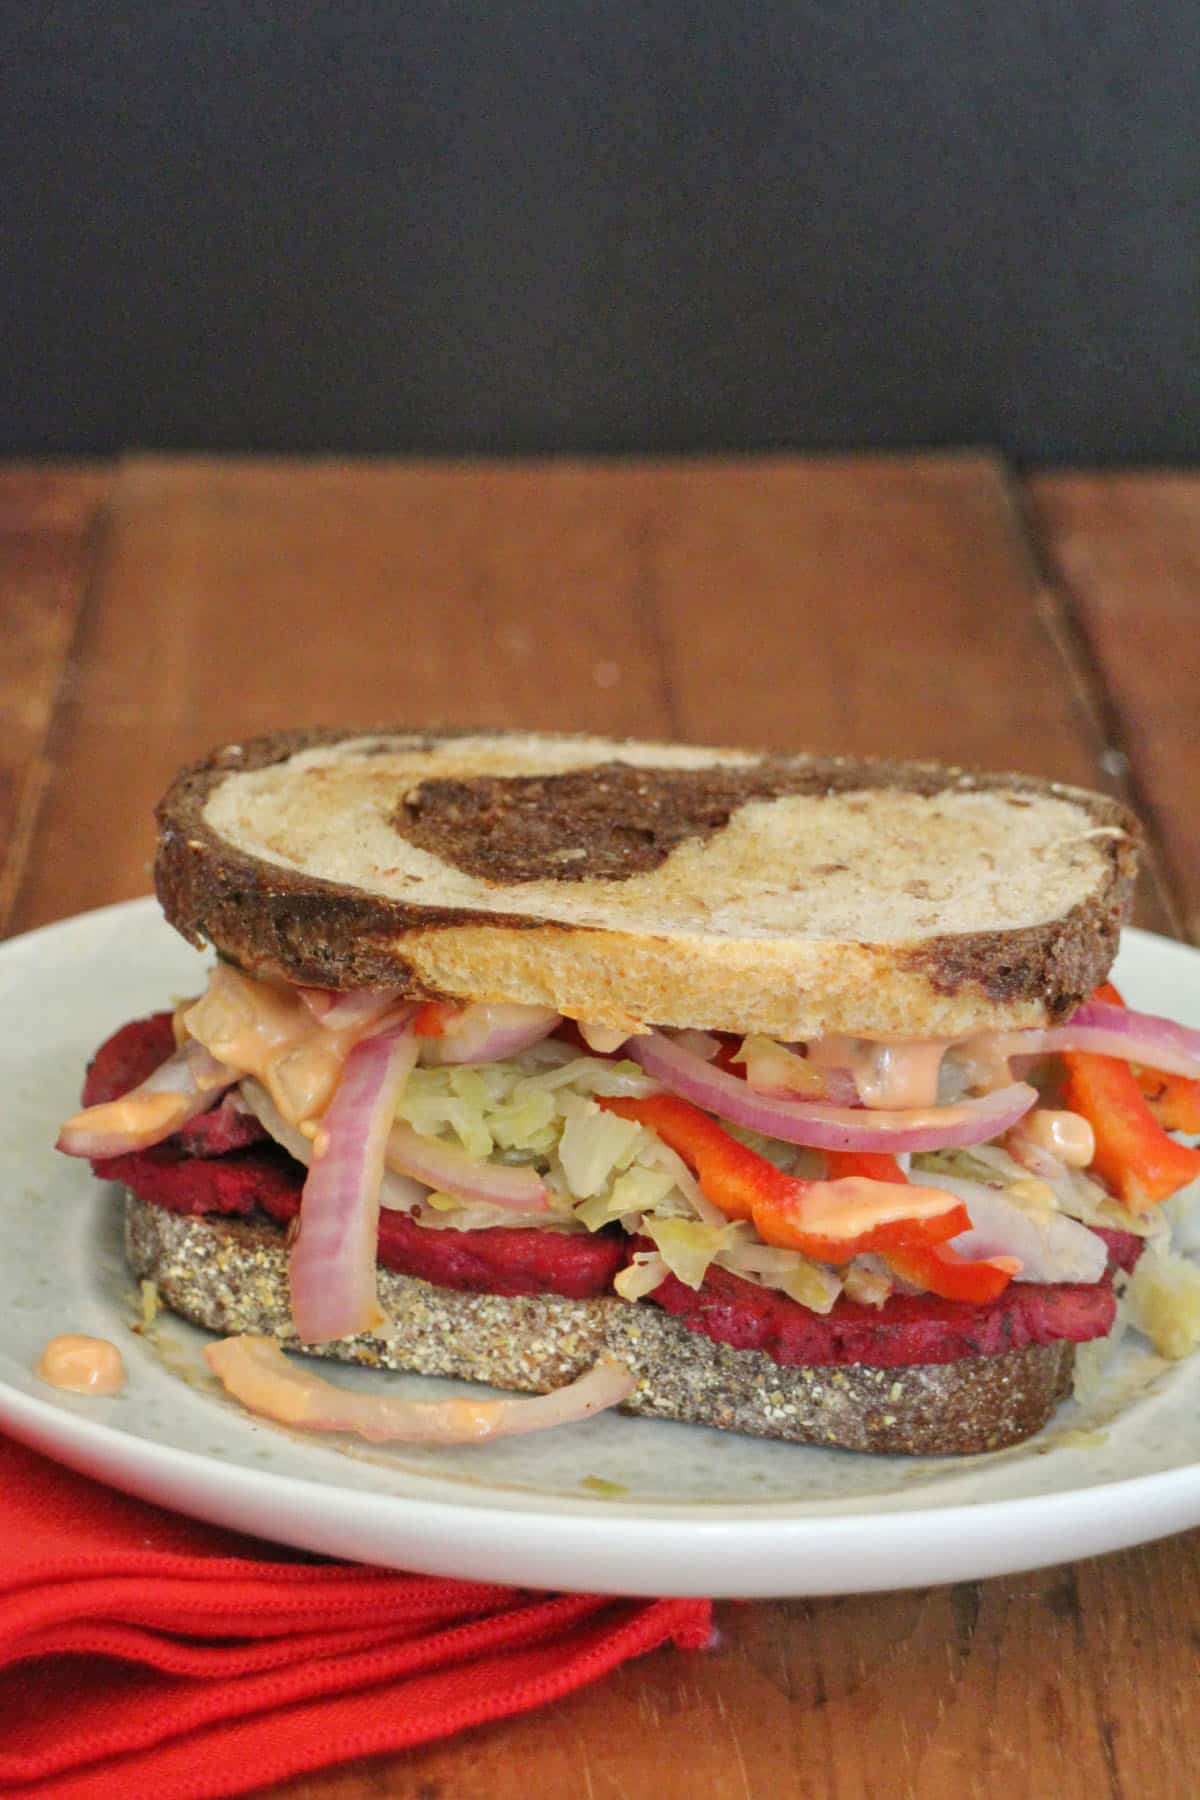 Vegan reuben sandwich on marbled rye with sauerkraut, peppers, and onions.